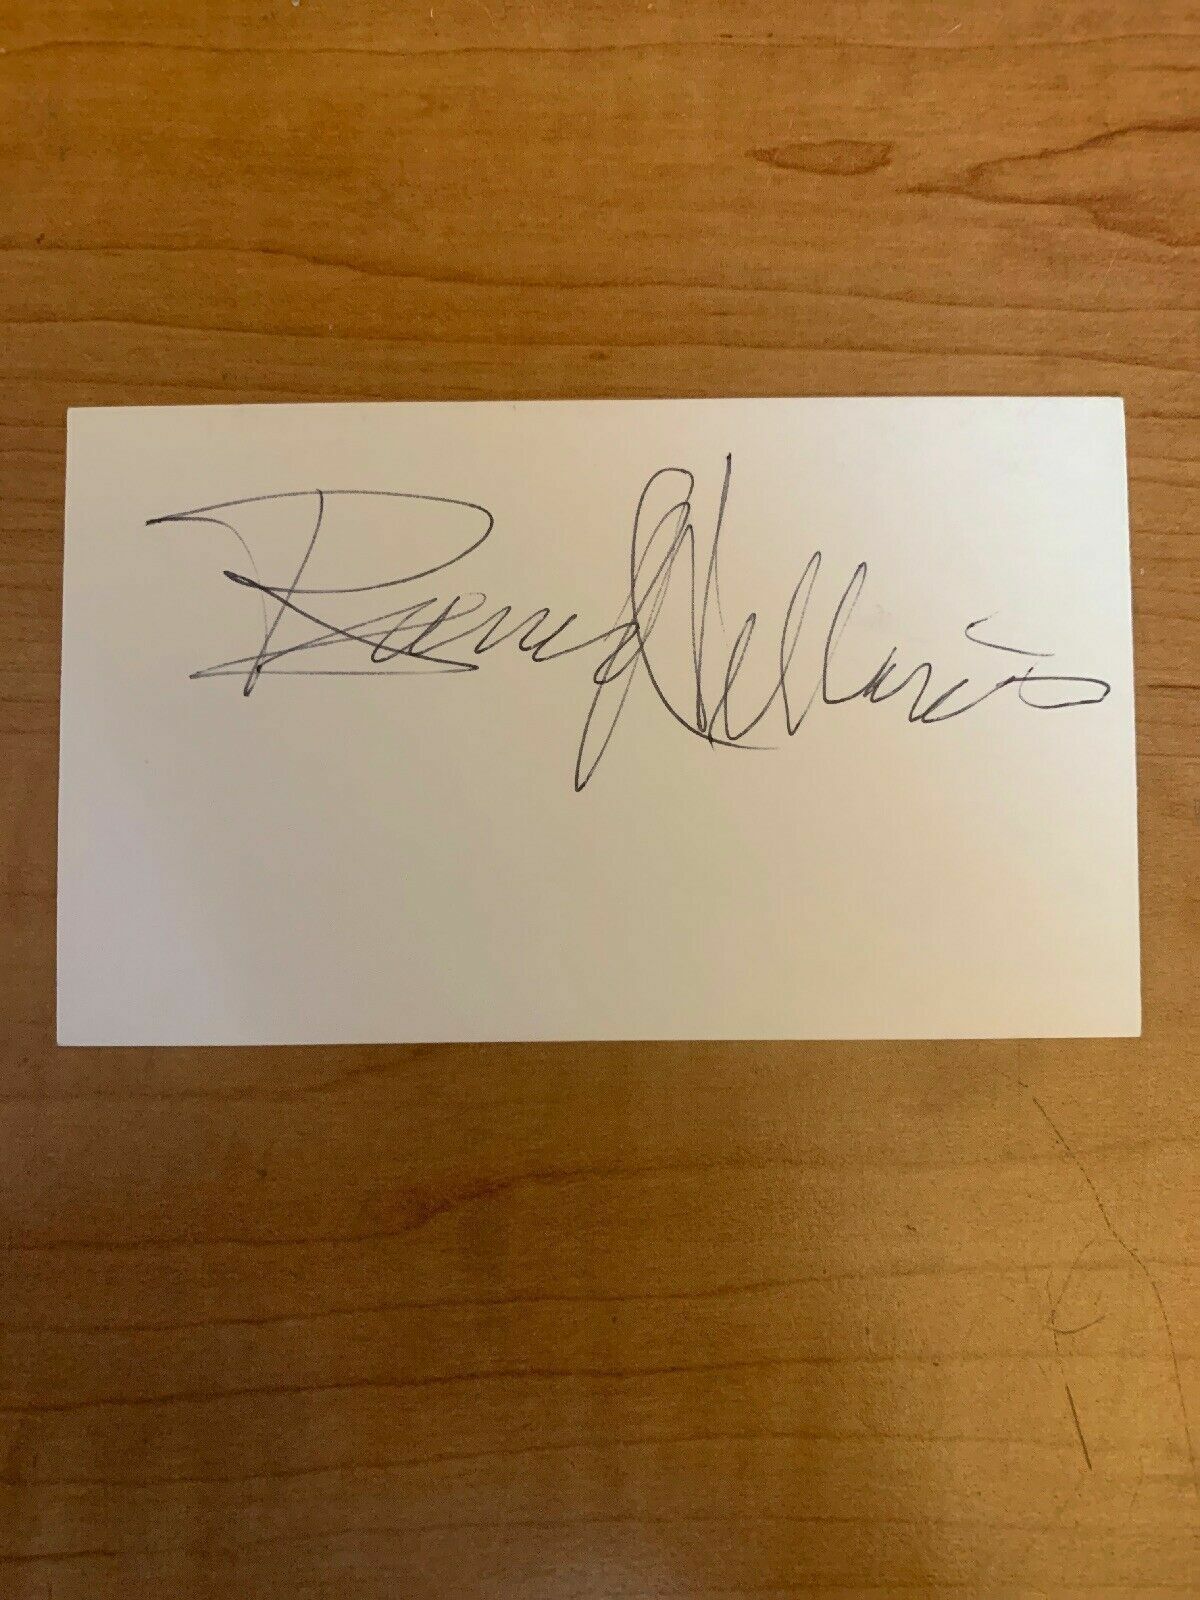 BERNIE WILLIAMS - LASALLE BASKETBALL - AUTHENTIC AUTOGRAPH SIGNED- B3759